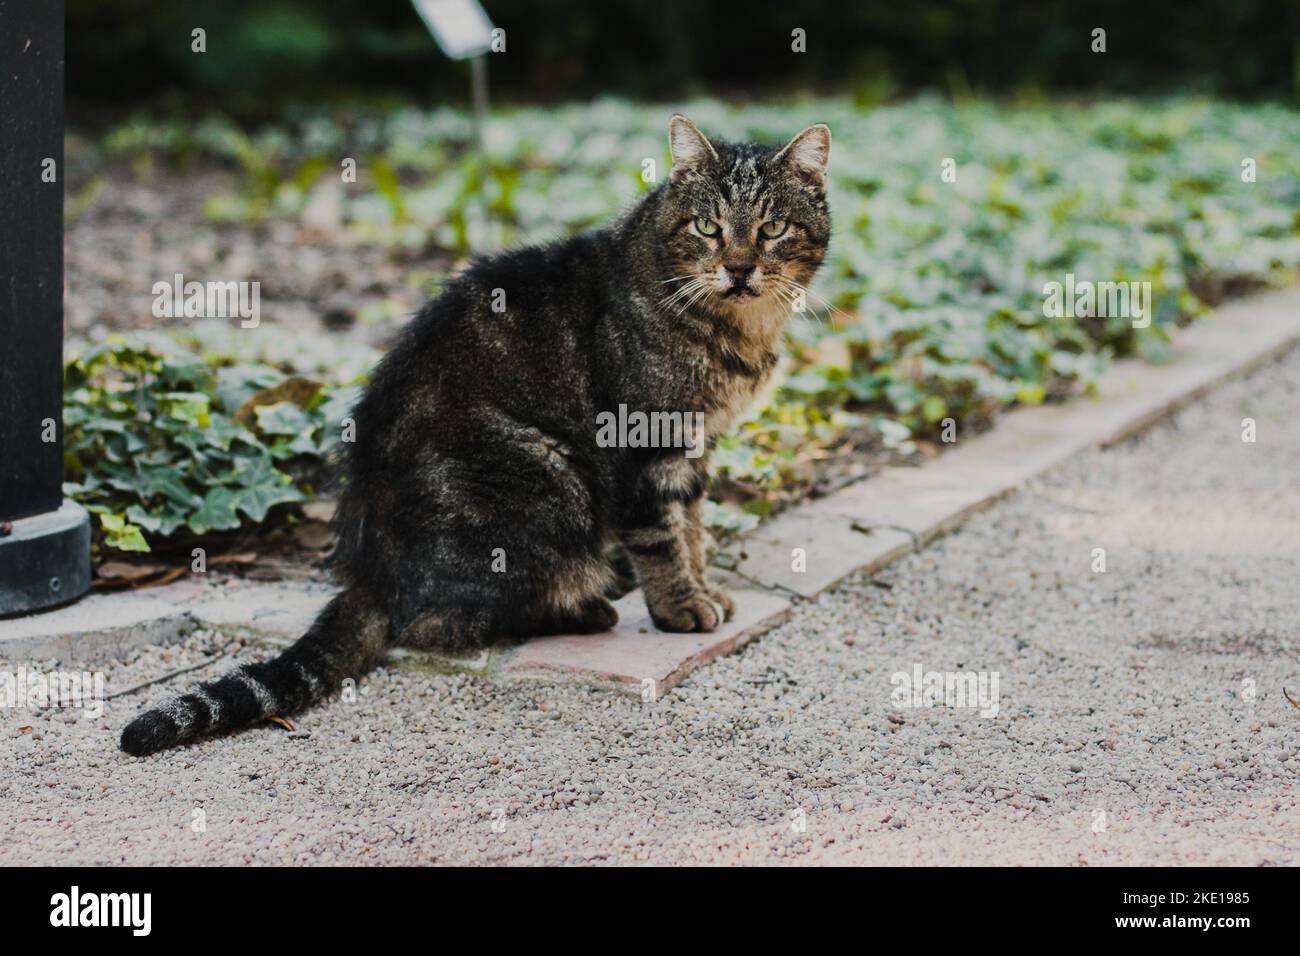 brown cat is sitting in a flower bed in a park next to a pedestrian sand path bordered by brick curbs. Stock Photo